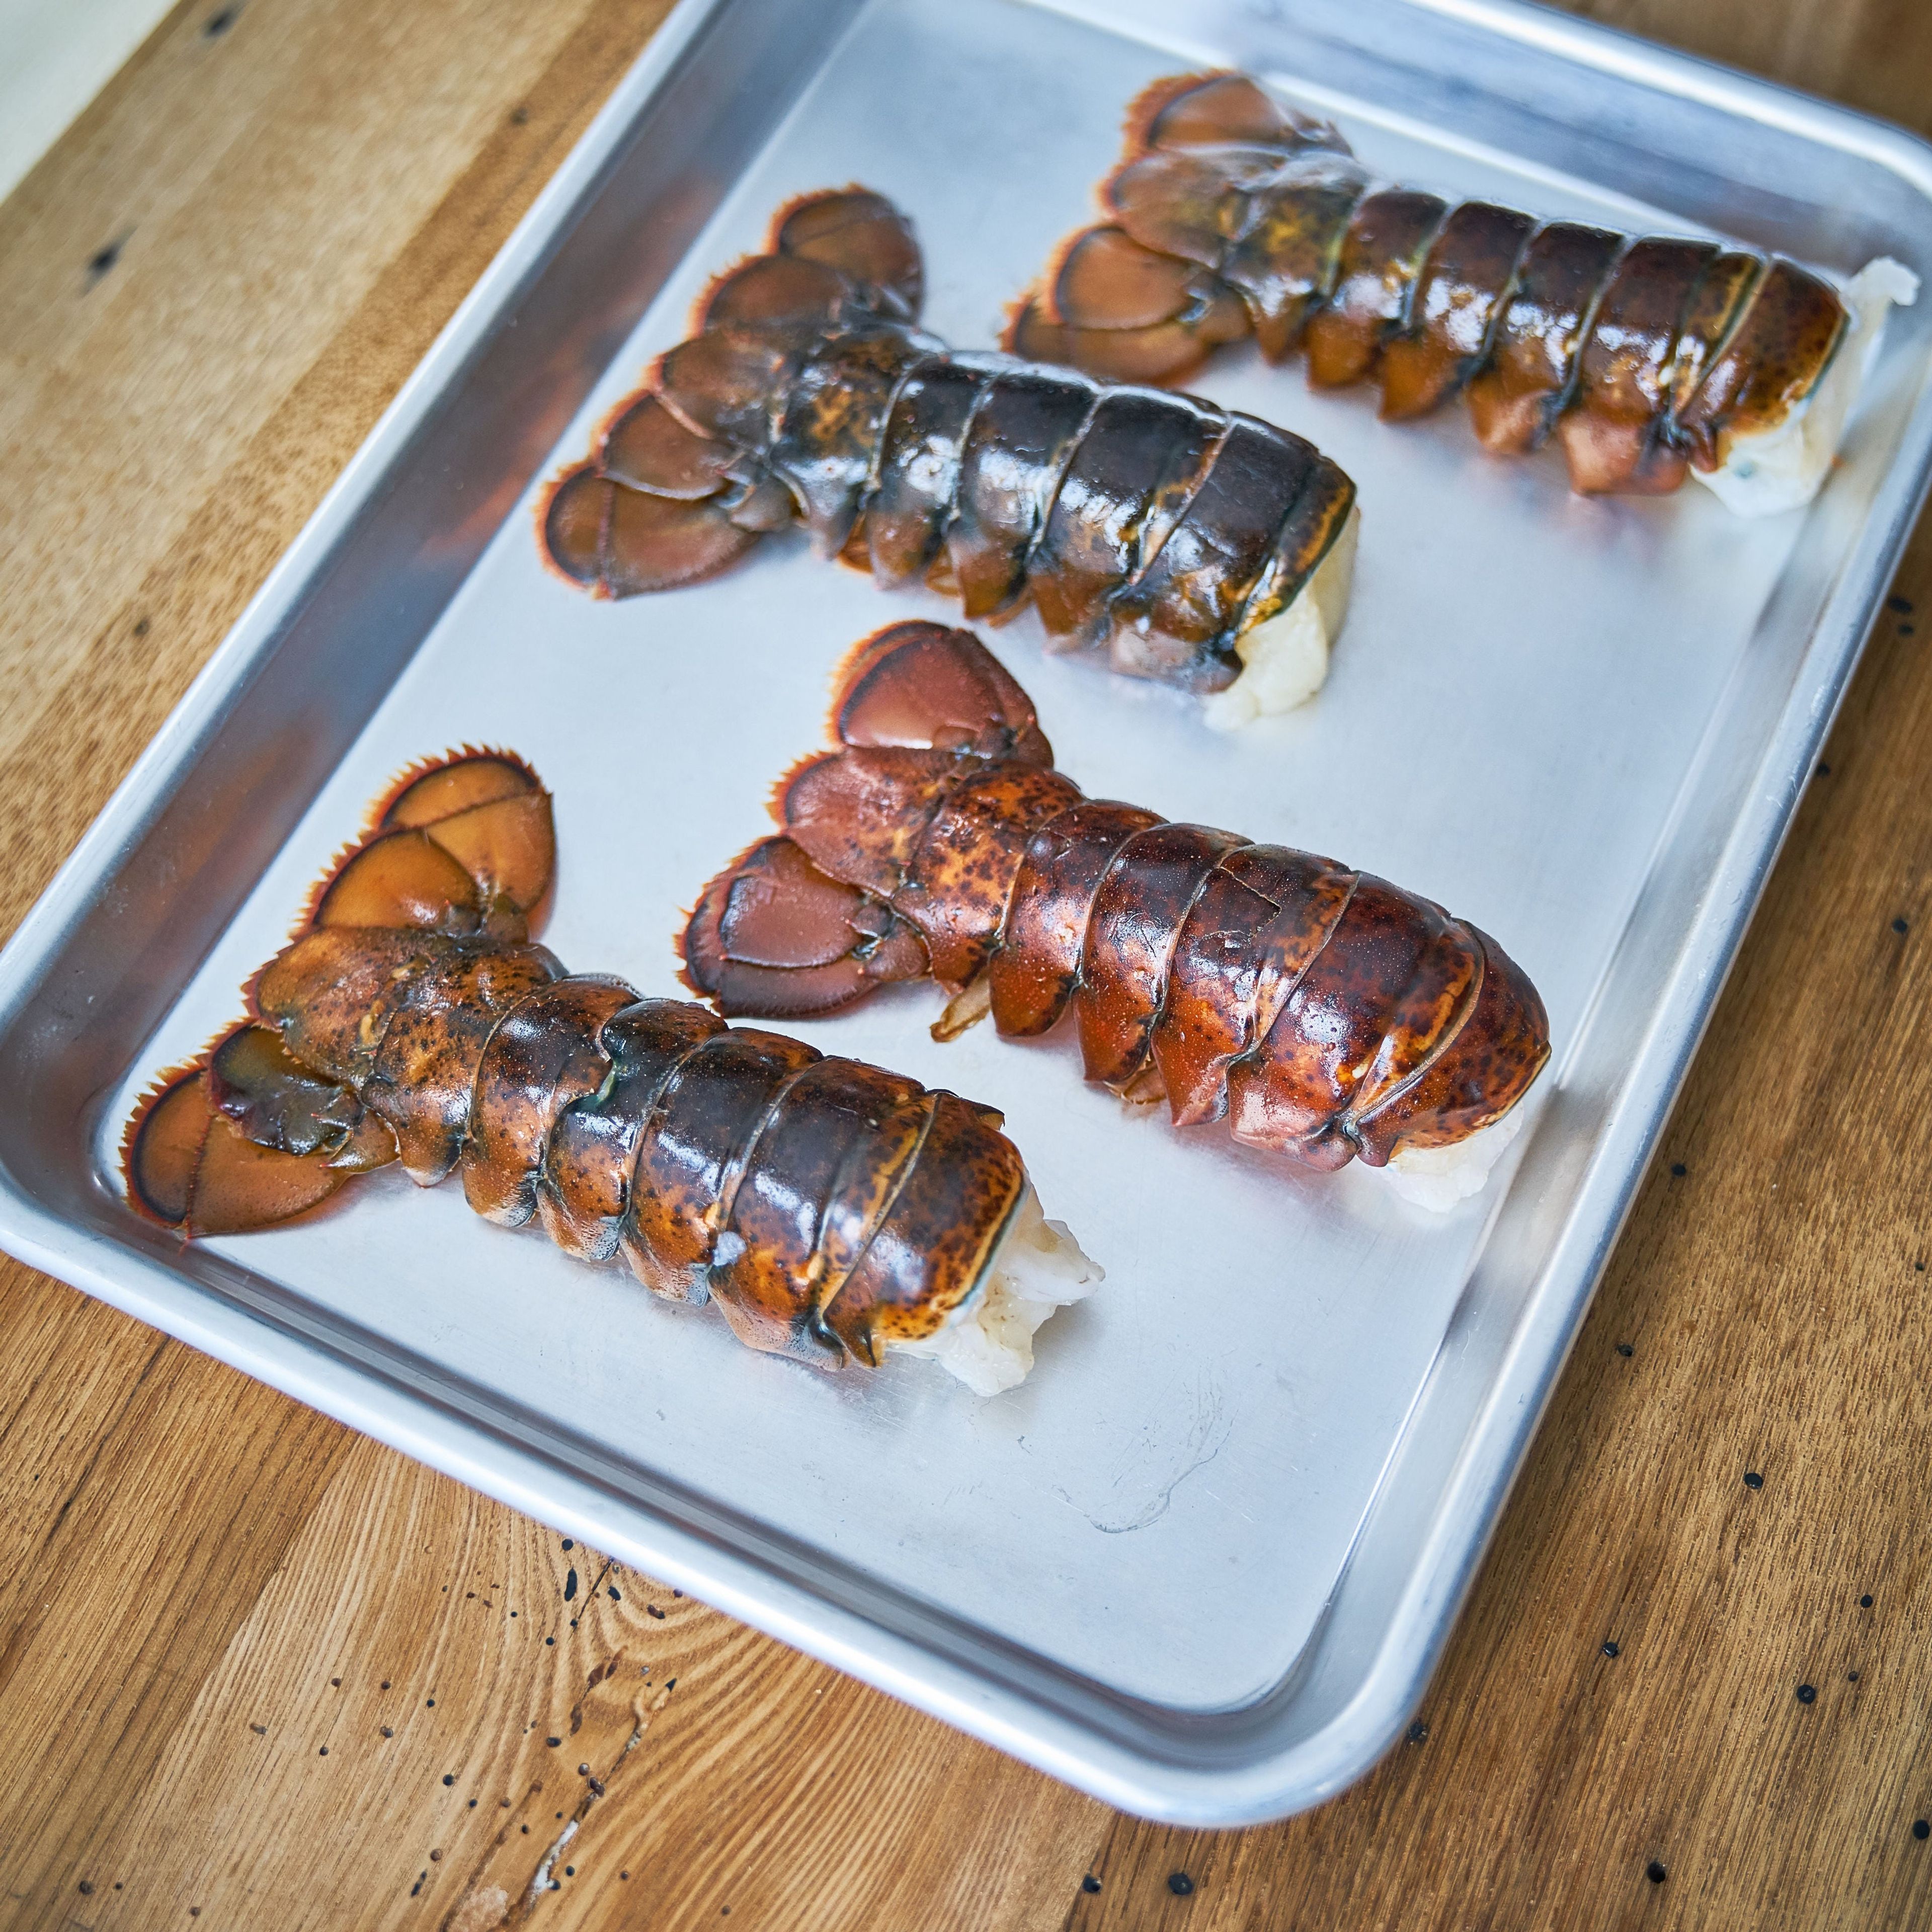 Large Lobster Tails - 6/7oz Each